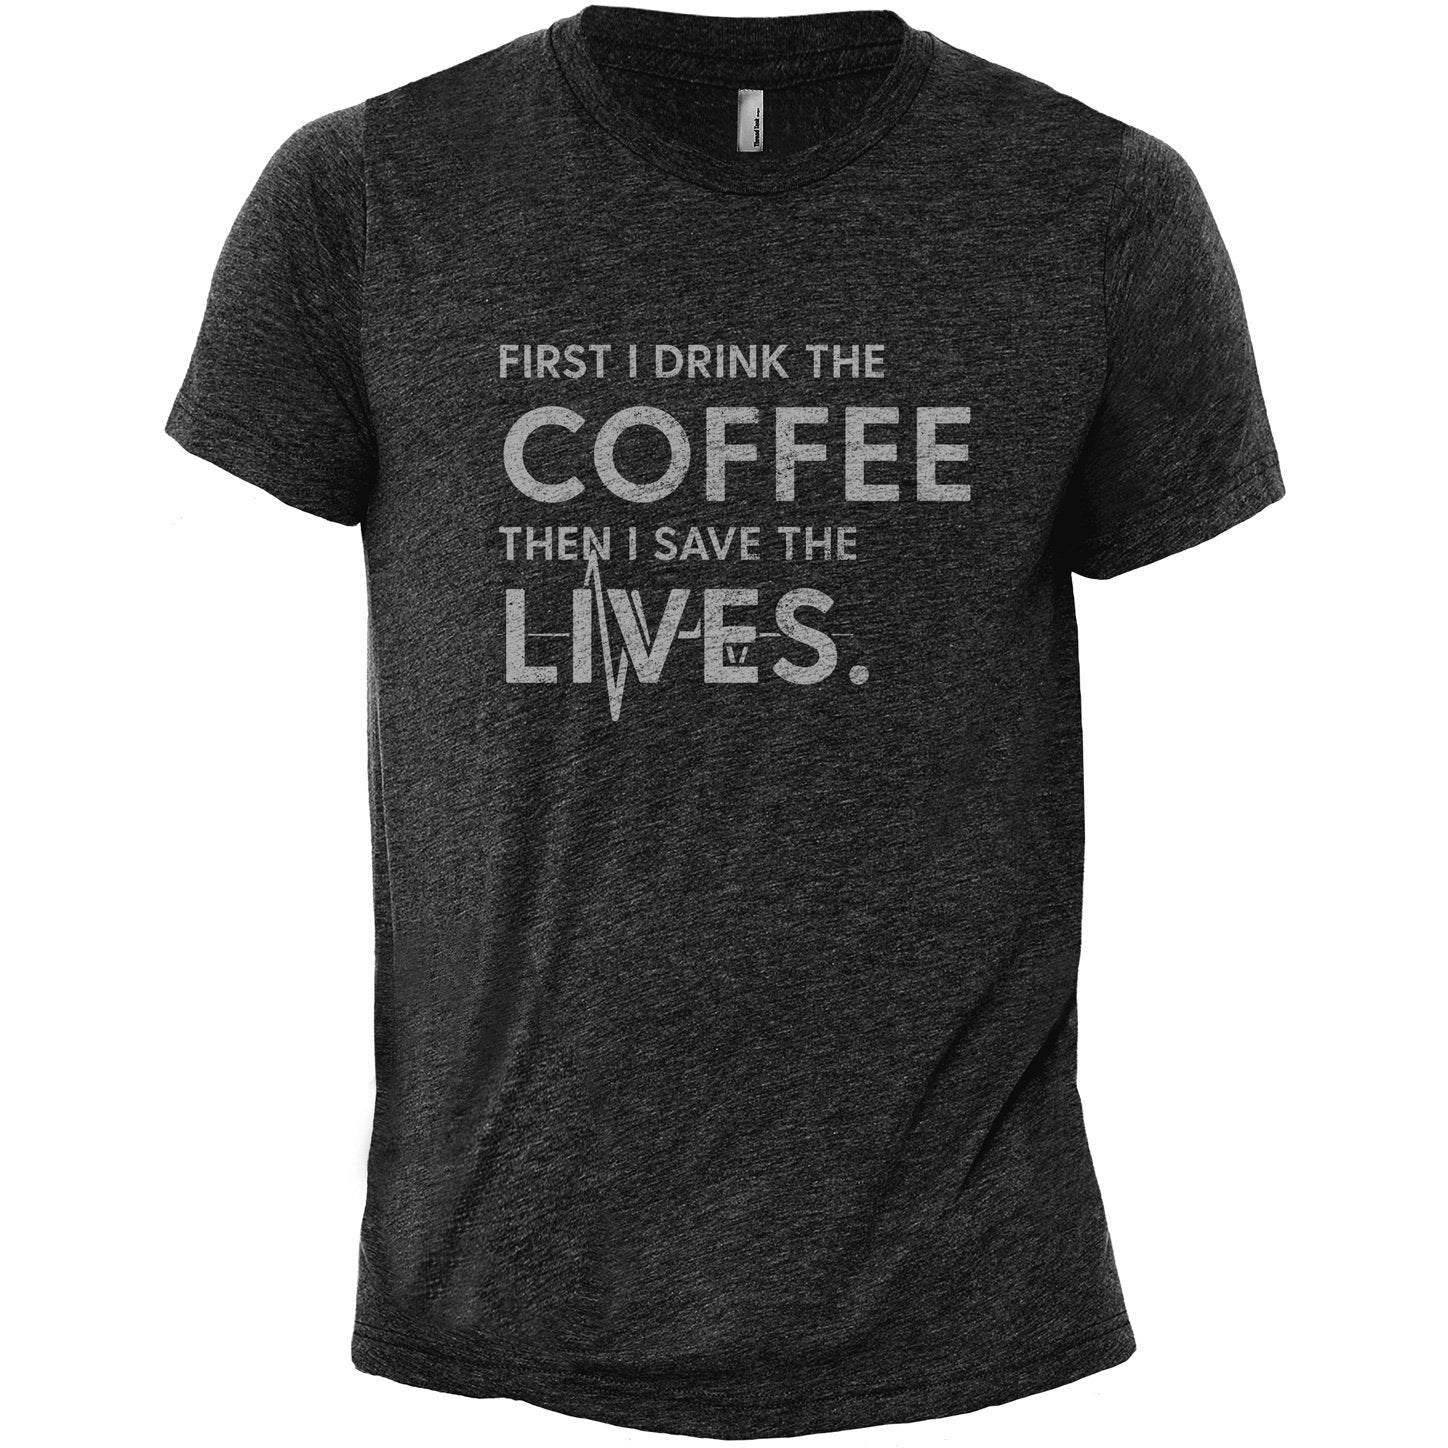 First I Drink The Coffee Then I Save The Lives Heather Grey Printed Graphic Men's Crew T-Shirt Tee